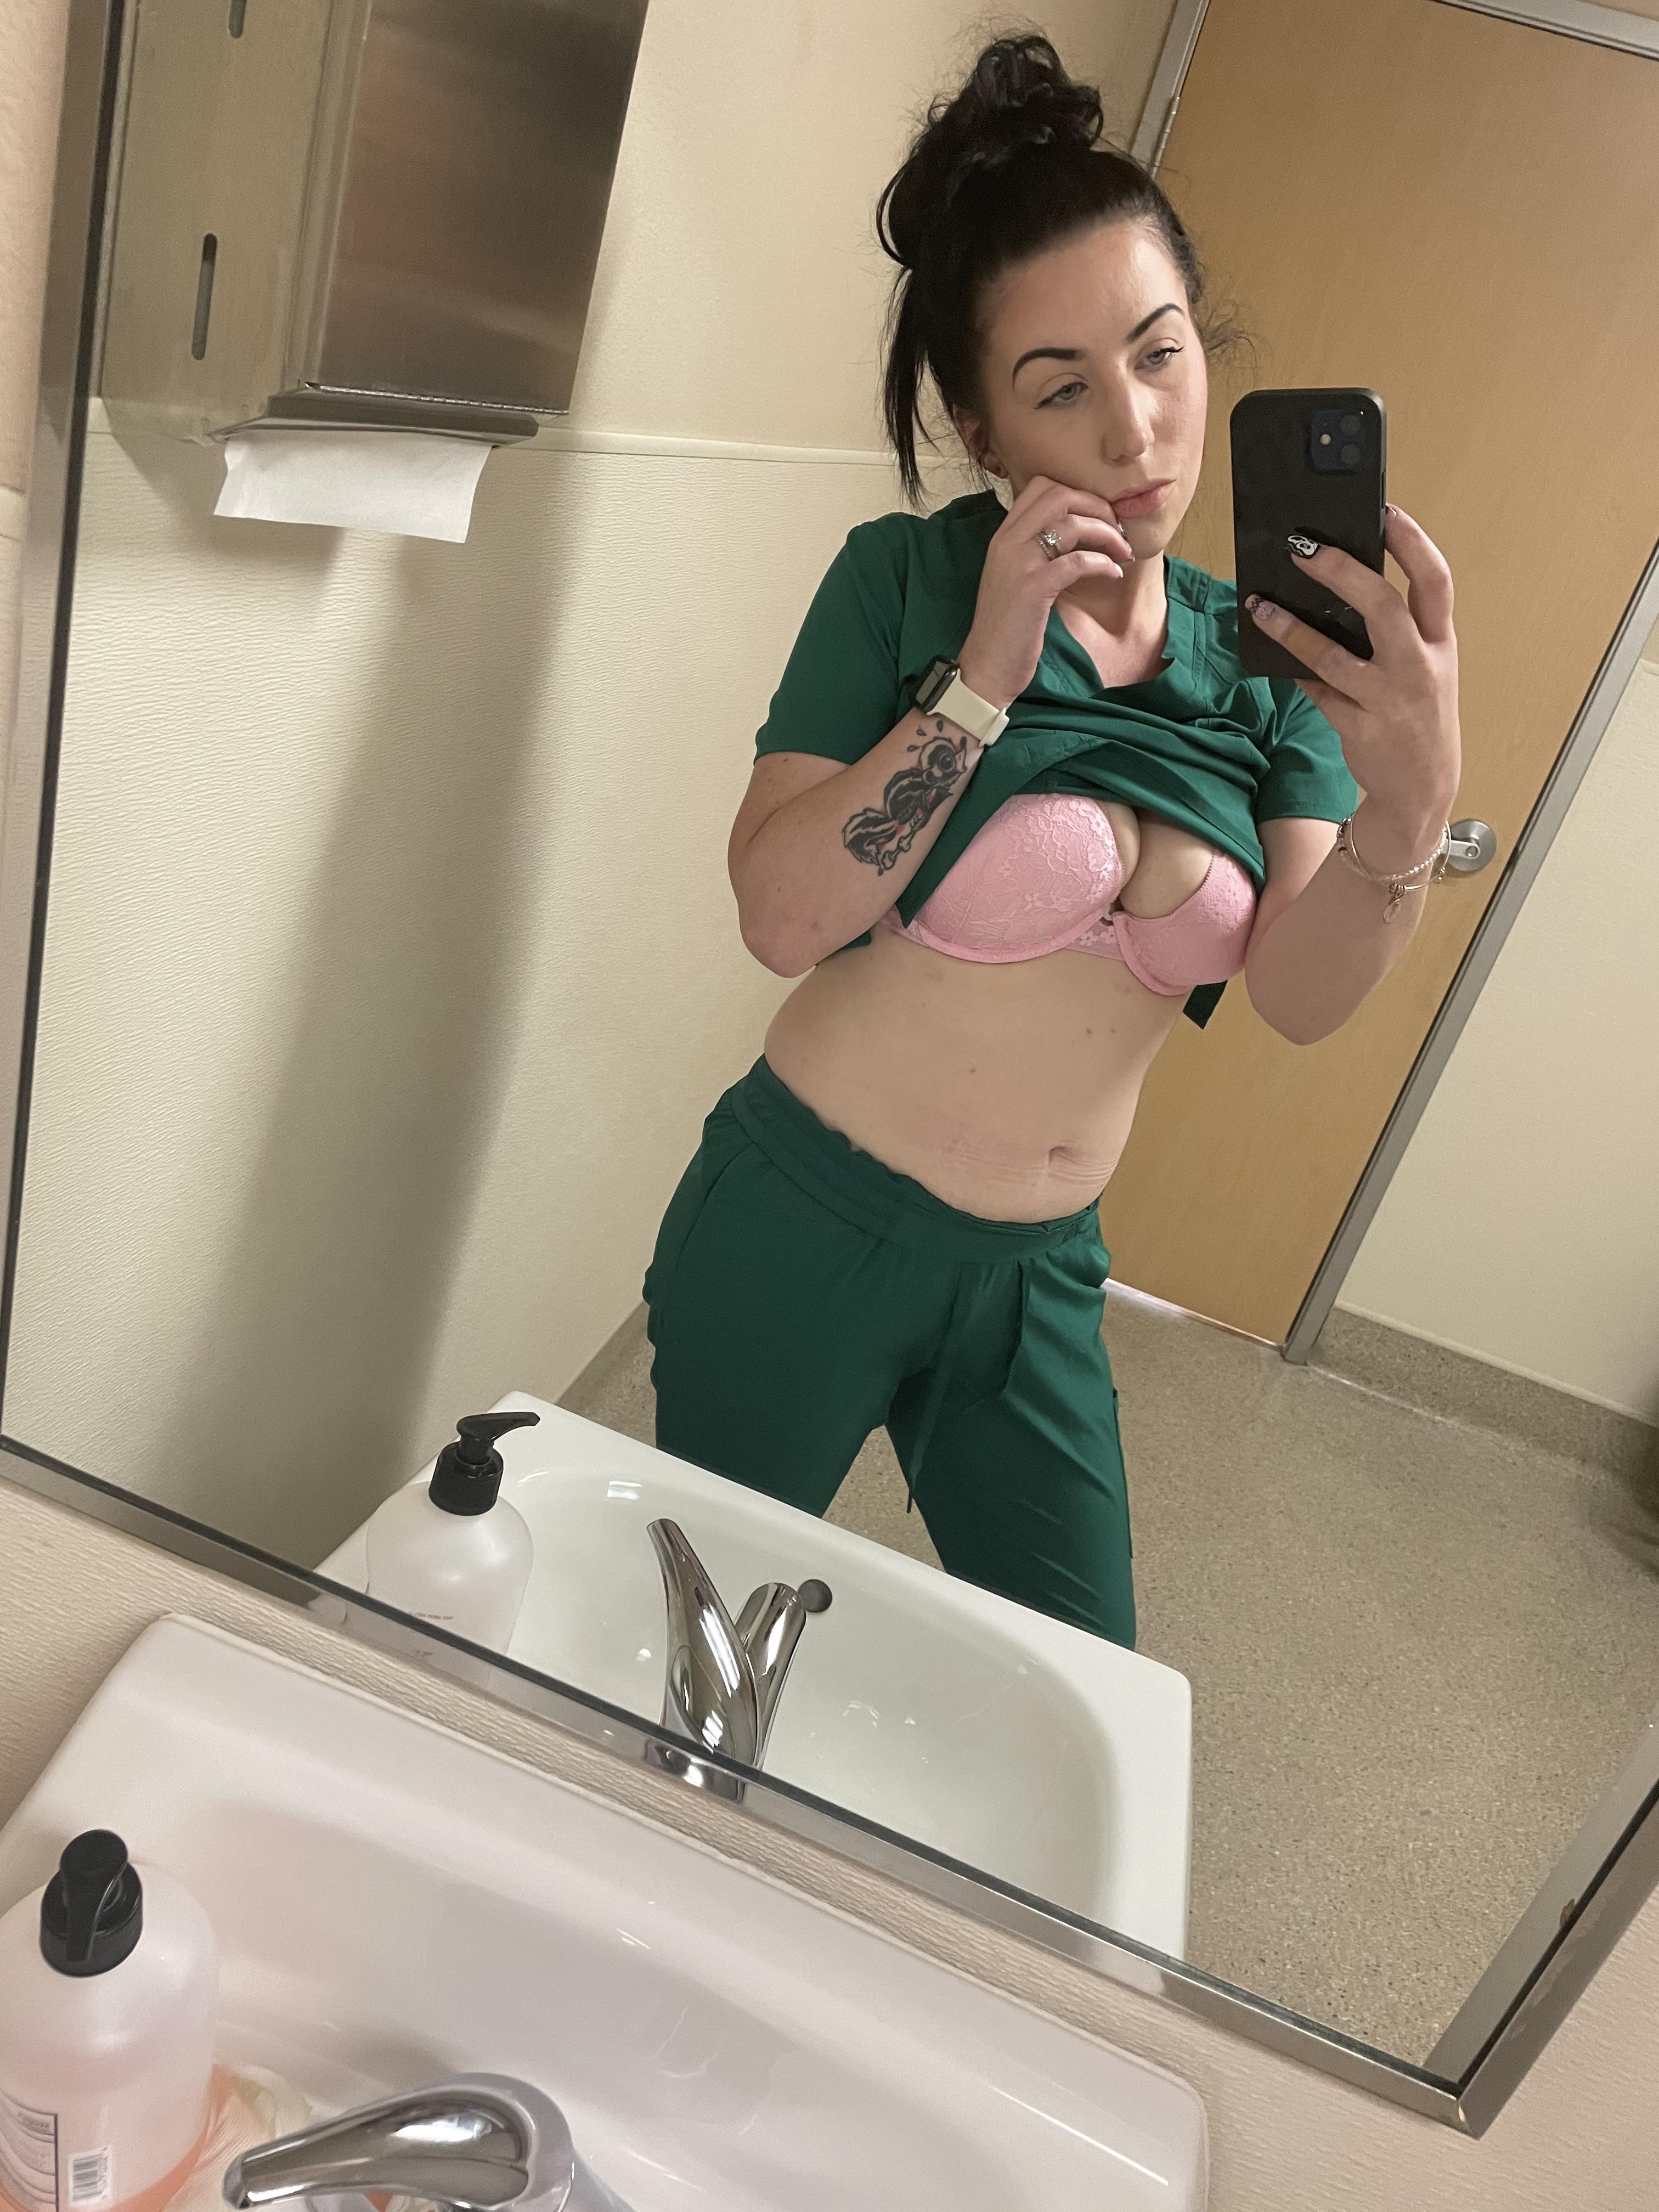 This nurse is wet about the patient in the other